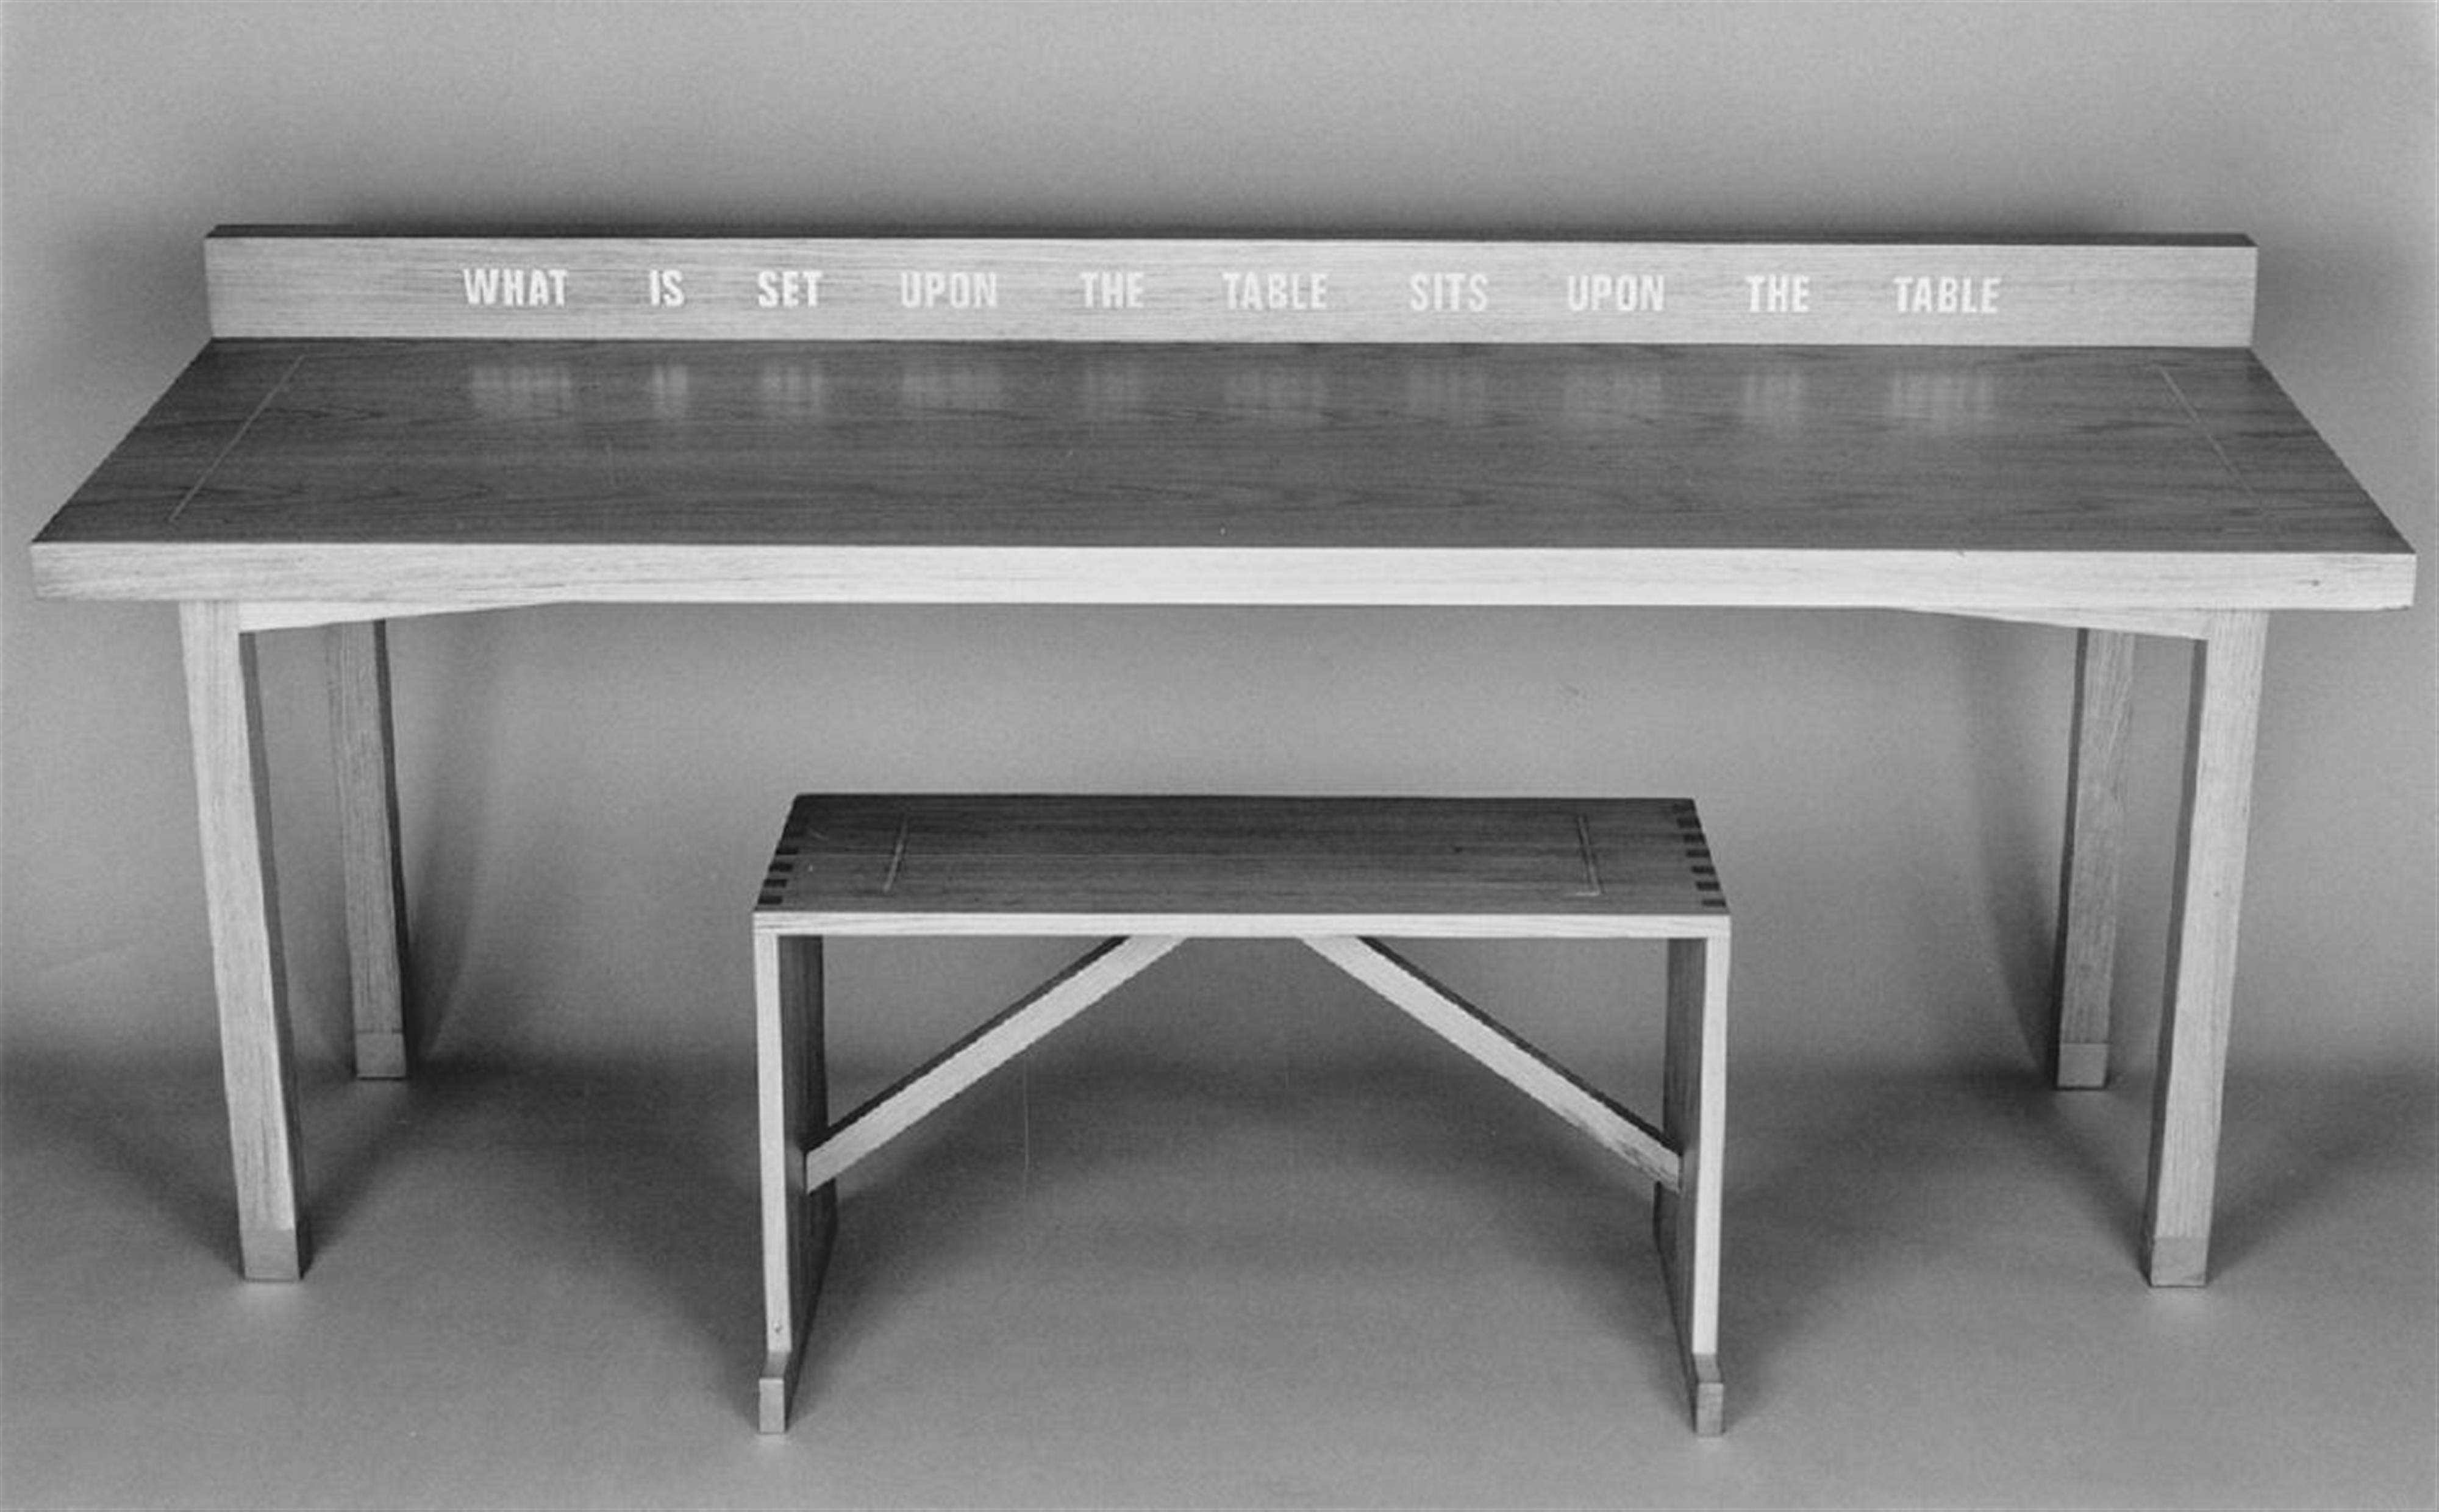 Lawrence Weiner - What is set upon the table sits upon the table - image-1